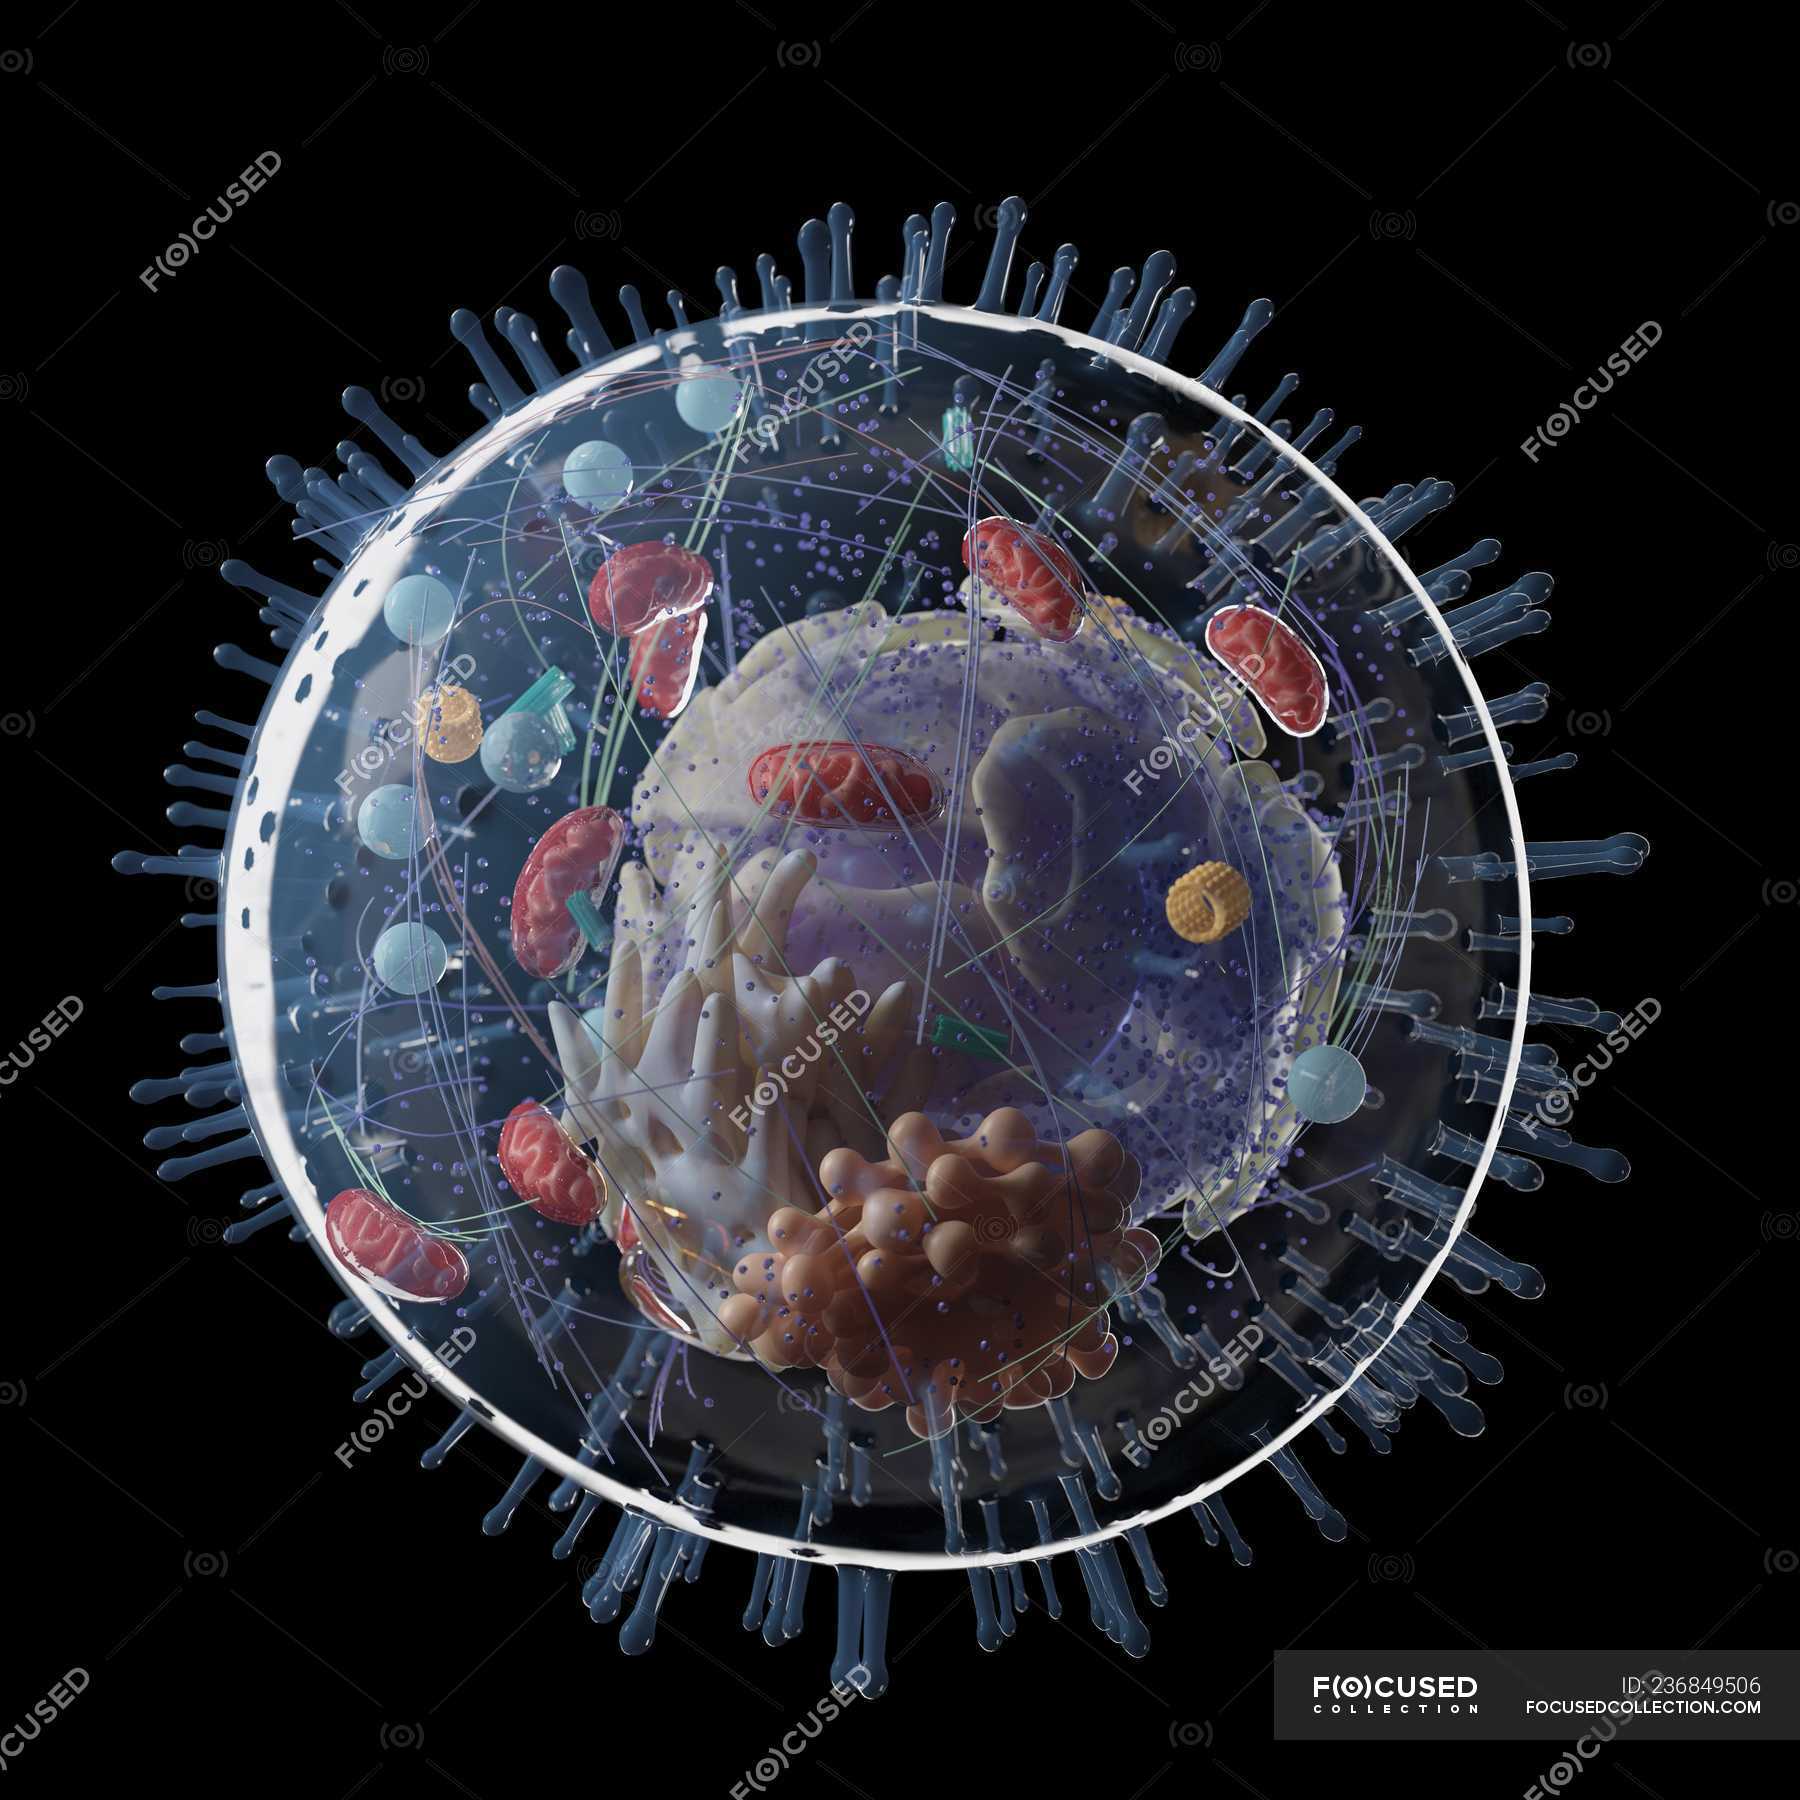 Medical illustration of human cell structure on black background